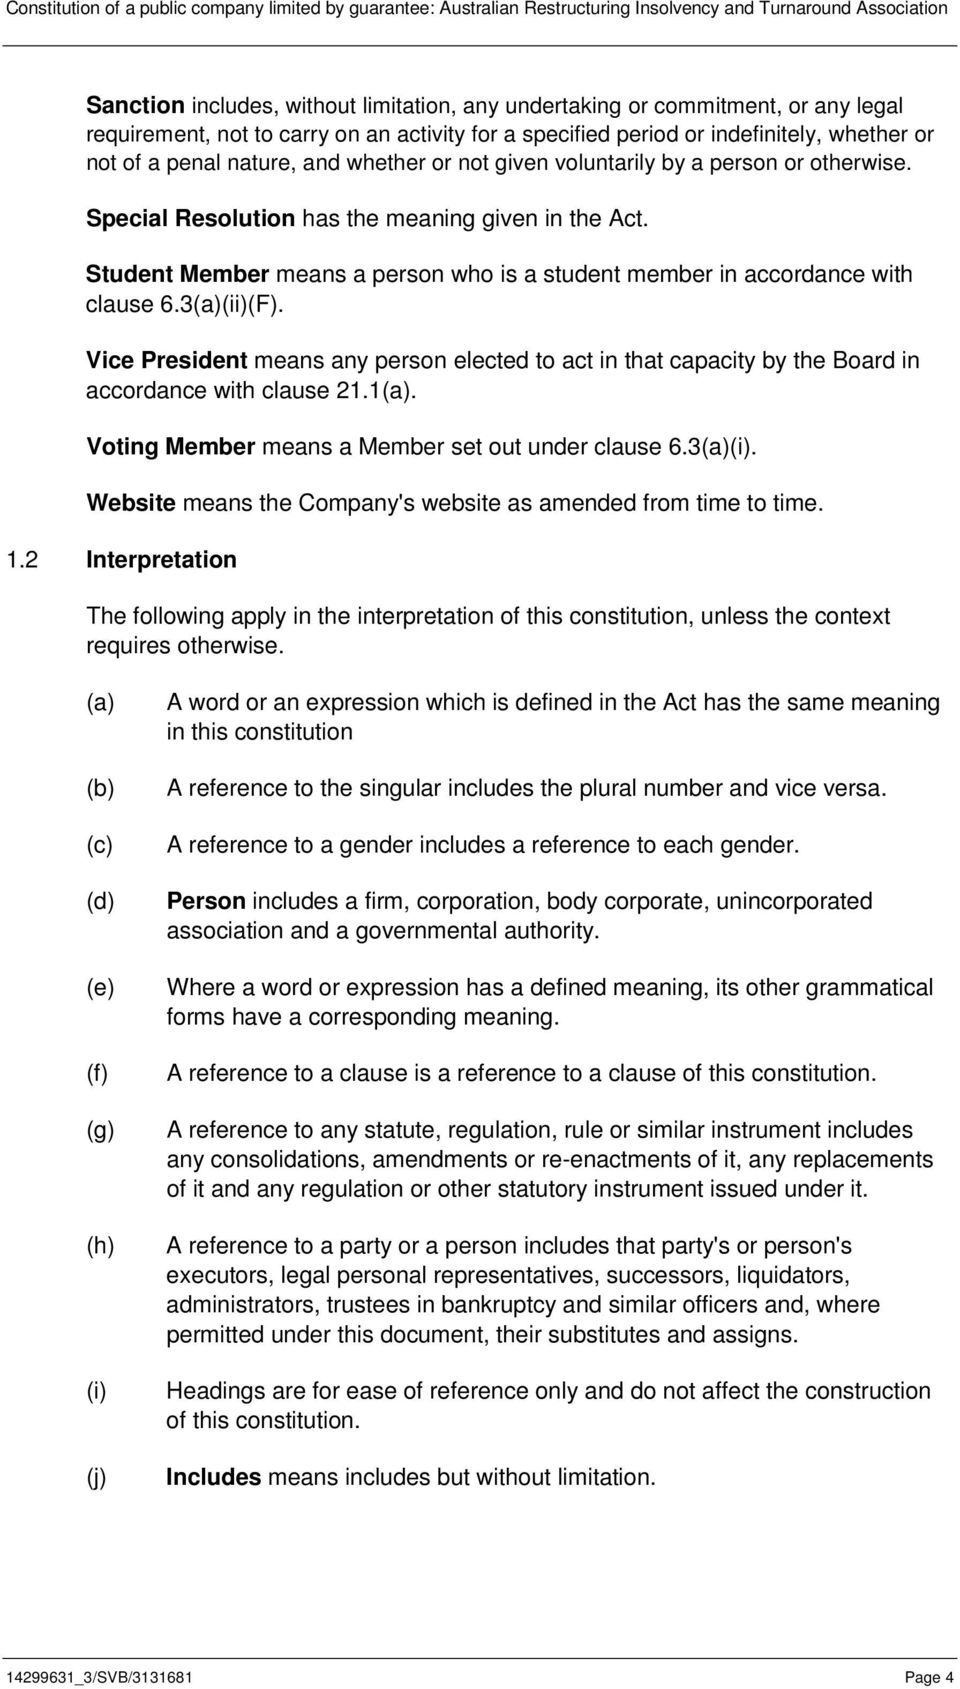 3(F). Vice President means any person elected to act in that capacity by the Board in accordance with clause 21.1. Voting Member means a Member set out under clause 6.3. Website means the Company's website as amended from time to time.